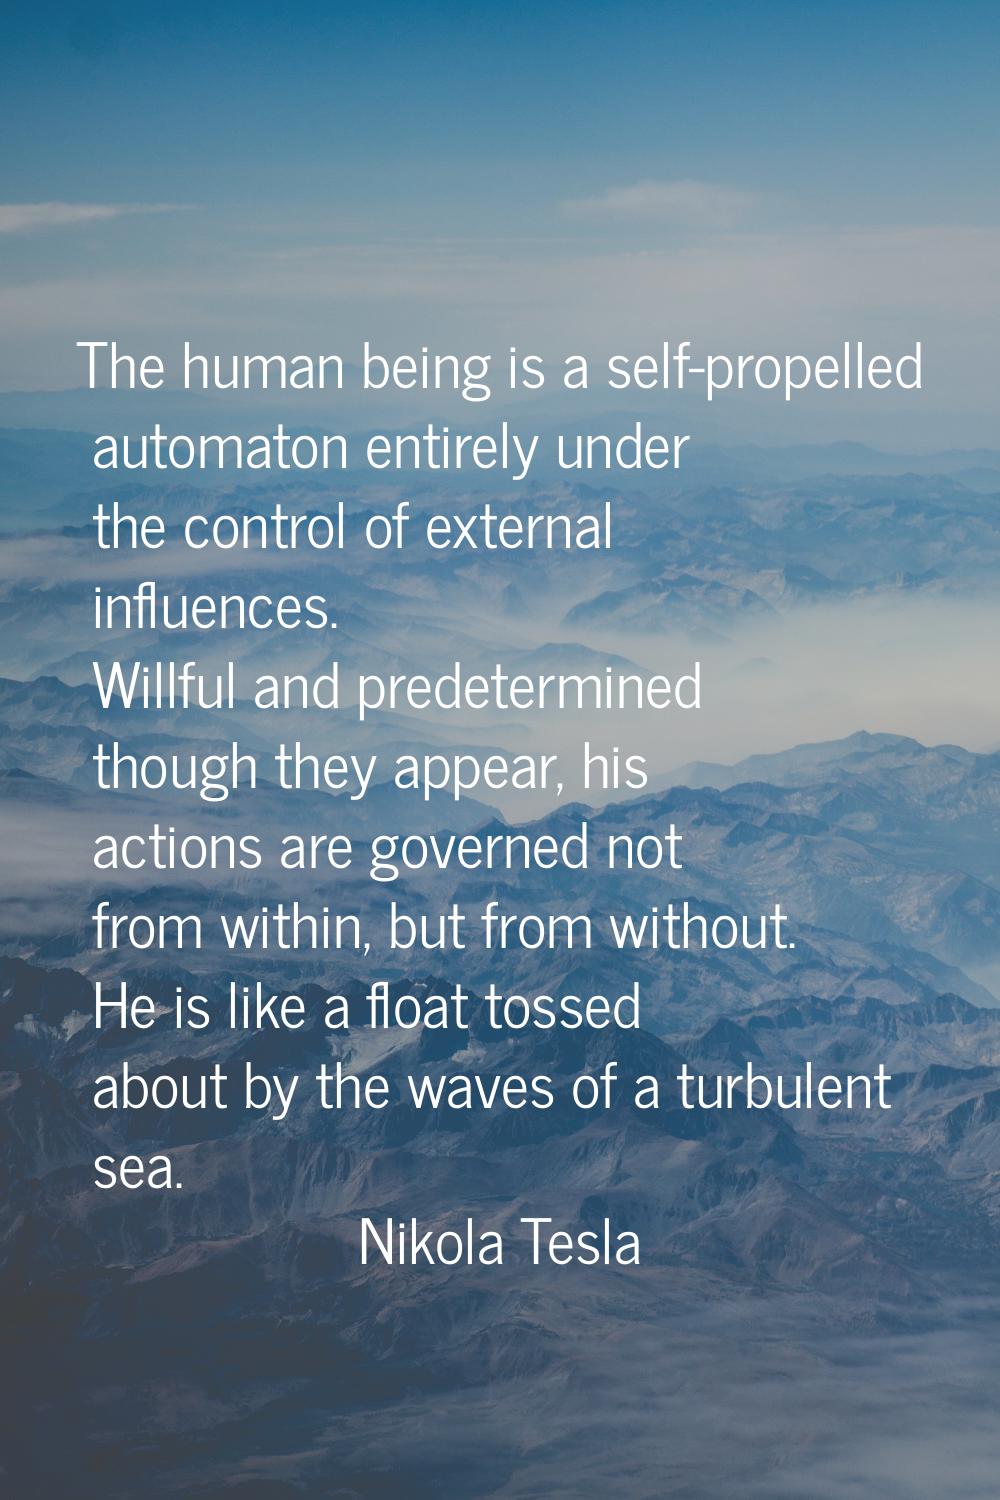 The human being is a self-propelled automaton entirely under the control of external influences. Wi